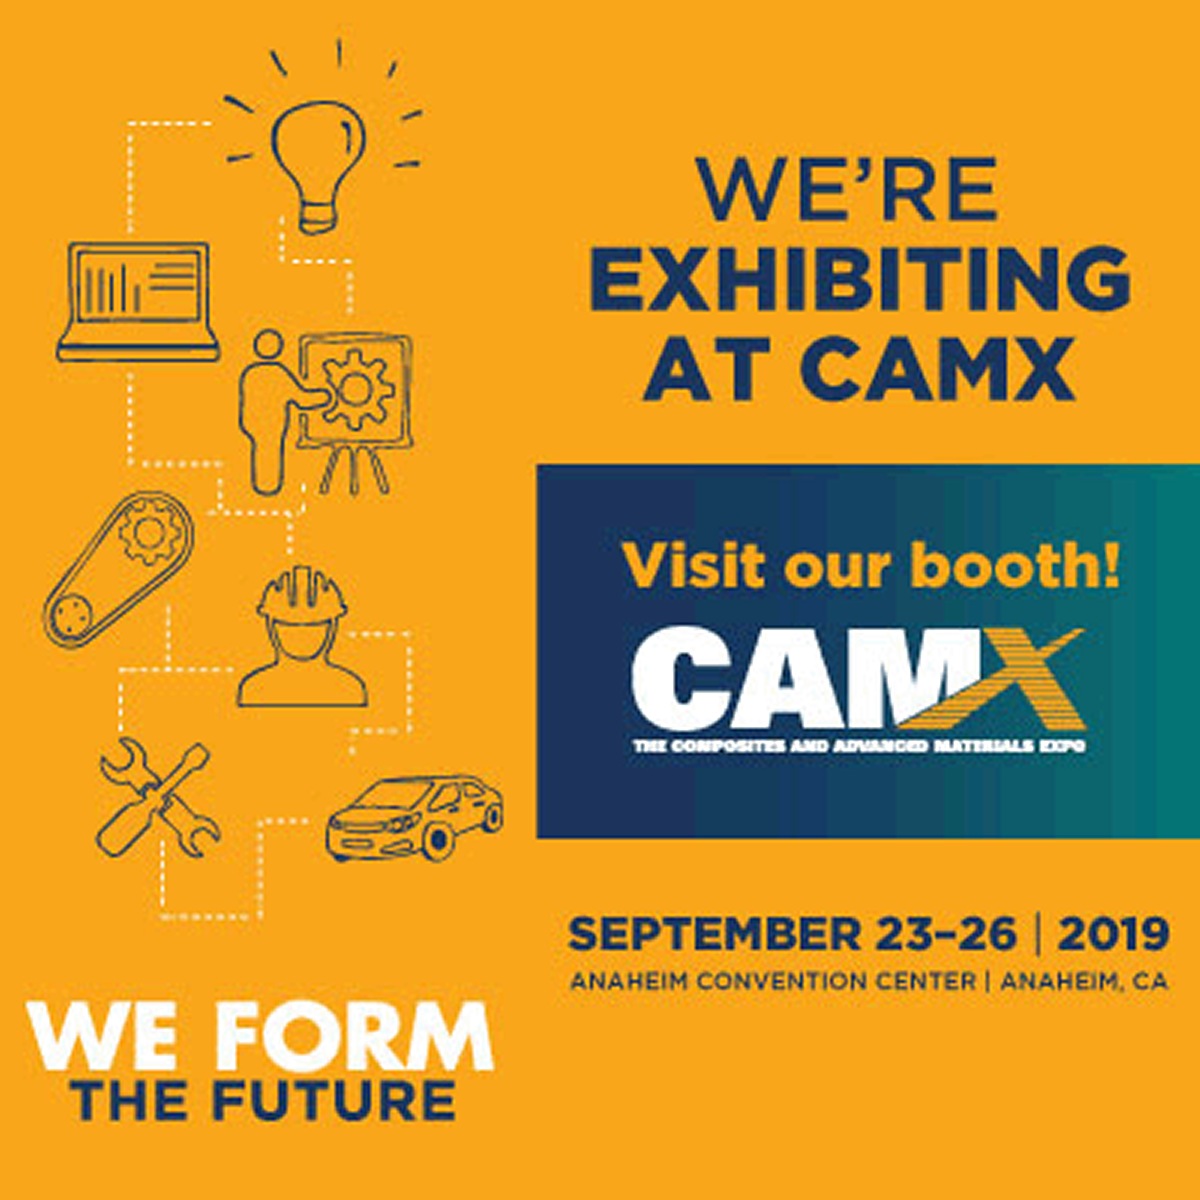 MULTIAX at the CAMX 2019